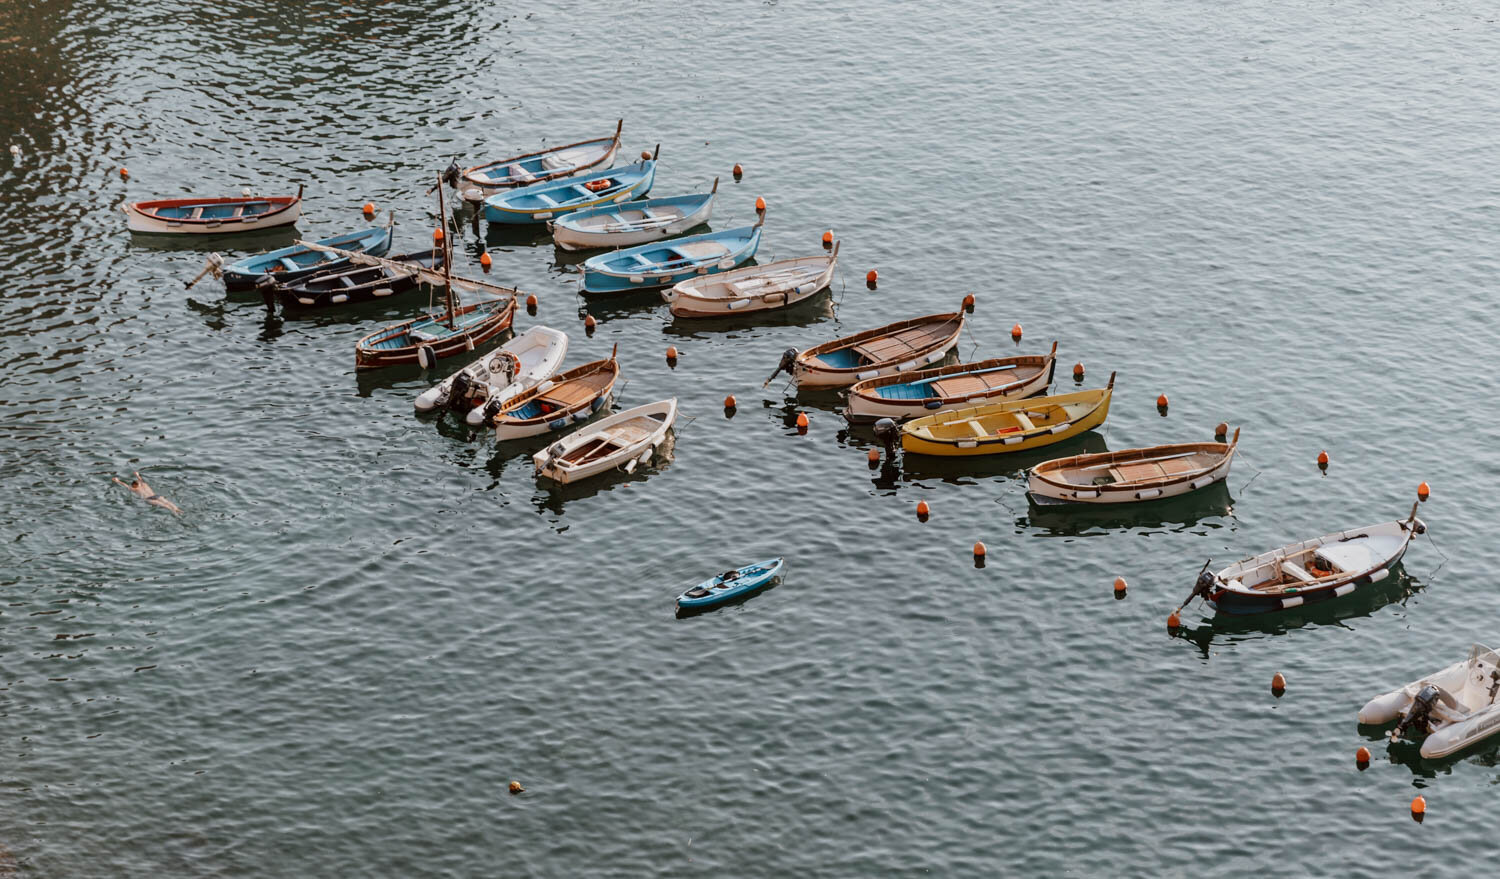 Boats in Vernazza harbour